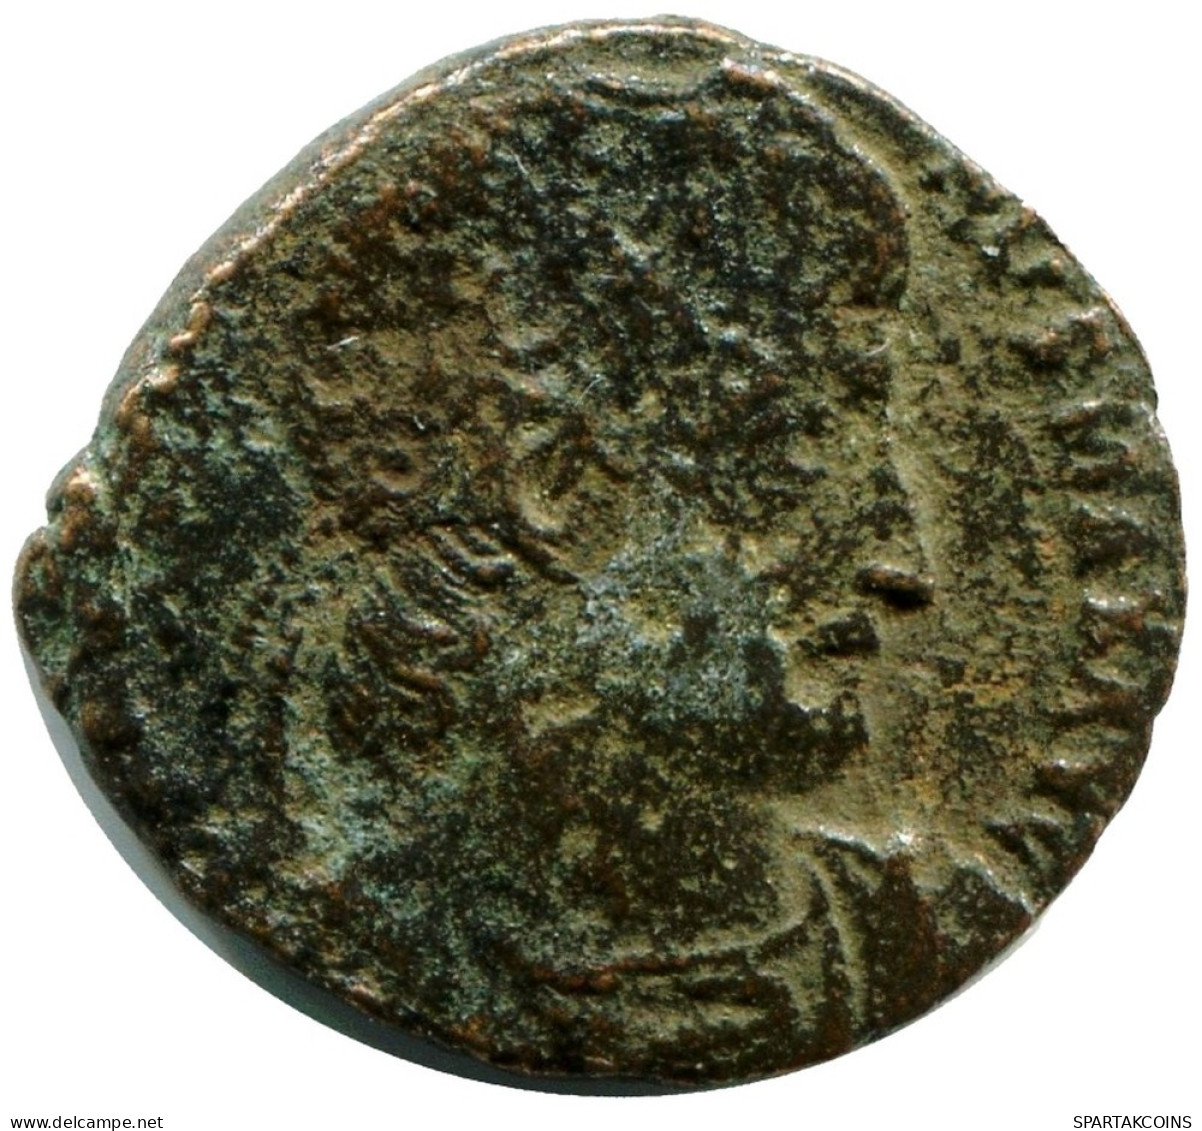 CONSTANTINE I MINTED IN ROME ITALY FROM THE ROYAL ONTARIO MUSEUM #ANC11184.14.D.A - The Christian Empire (307 AD To 363 AD)